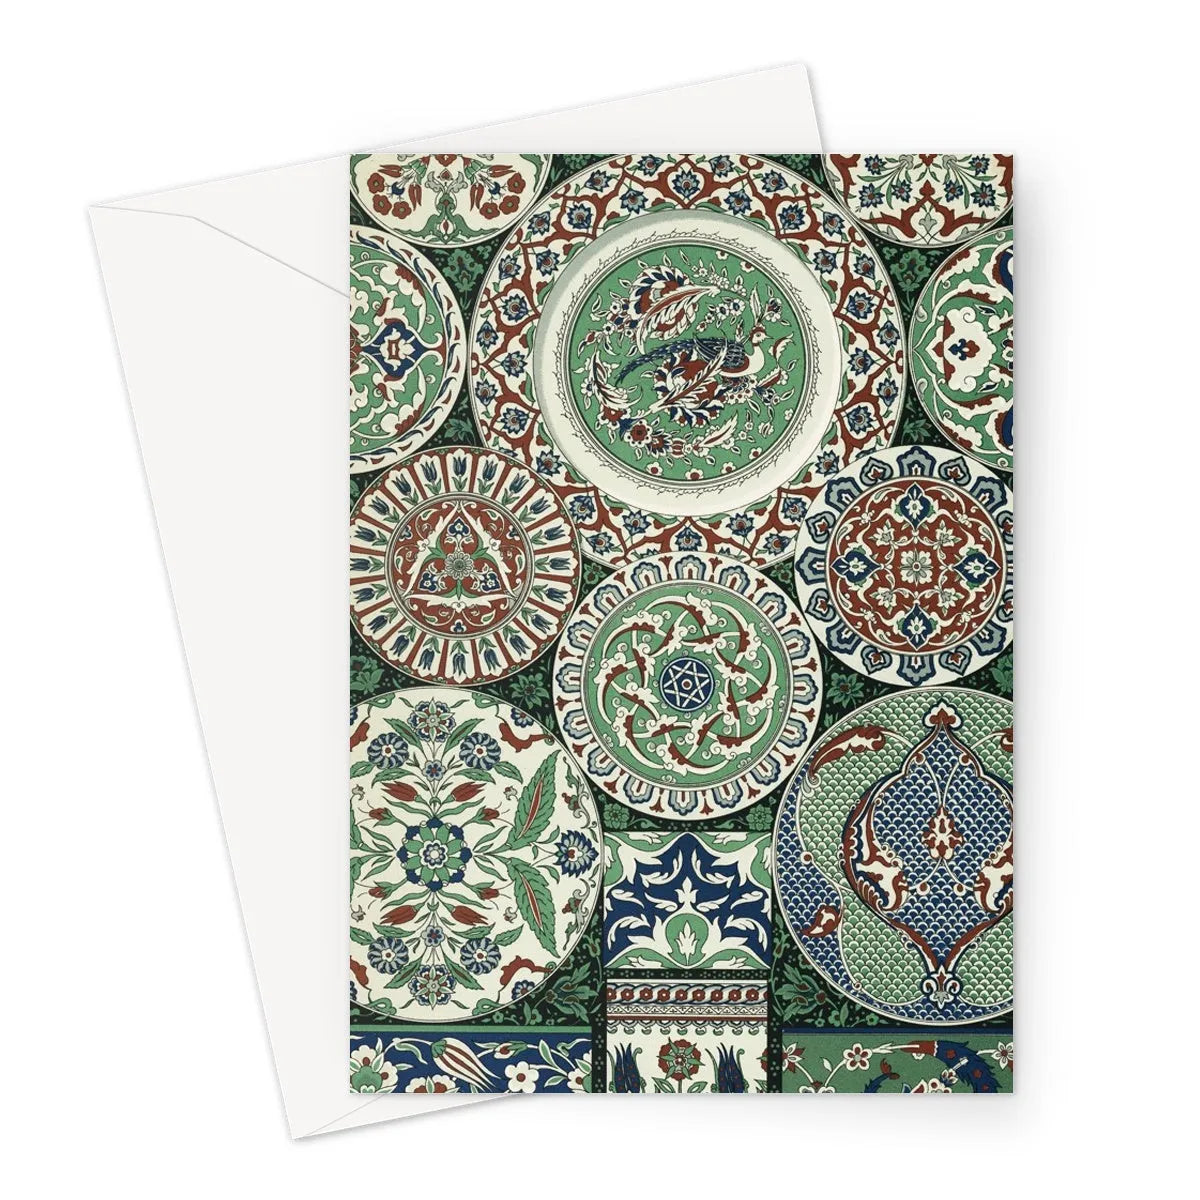 Islamic Pattern By Auguste Racinet Greeting Card - A5 Portrait / 1 Card - Greeting & Note Cards - Aesthetic Art